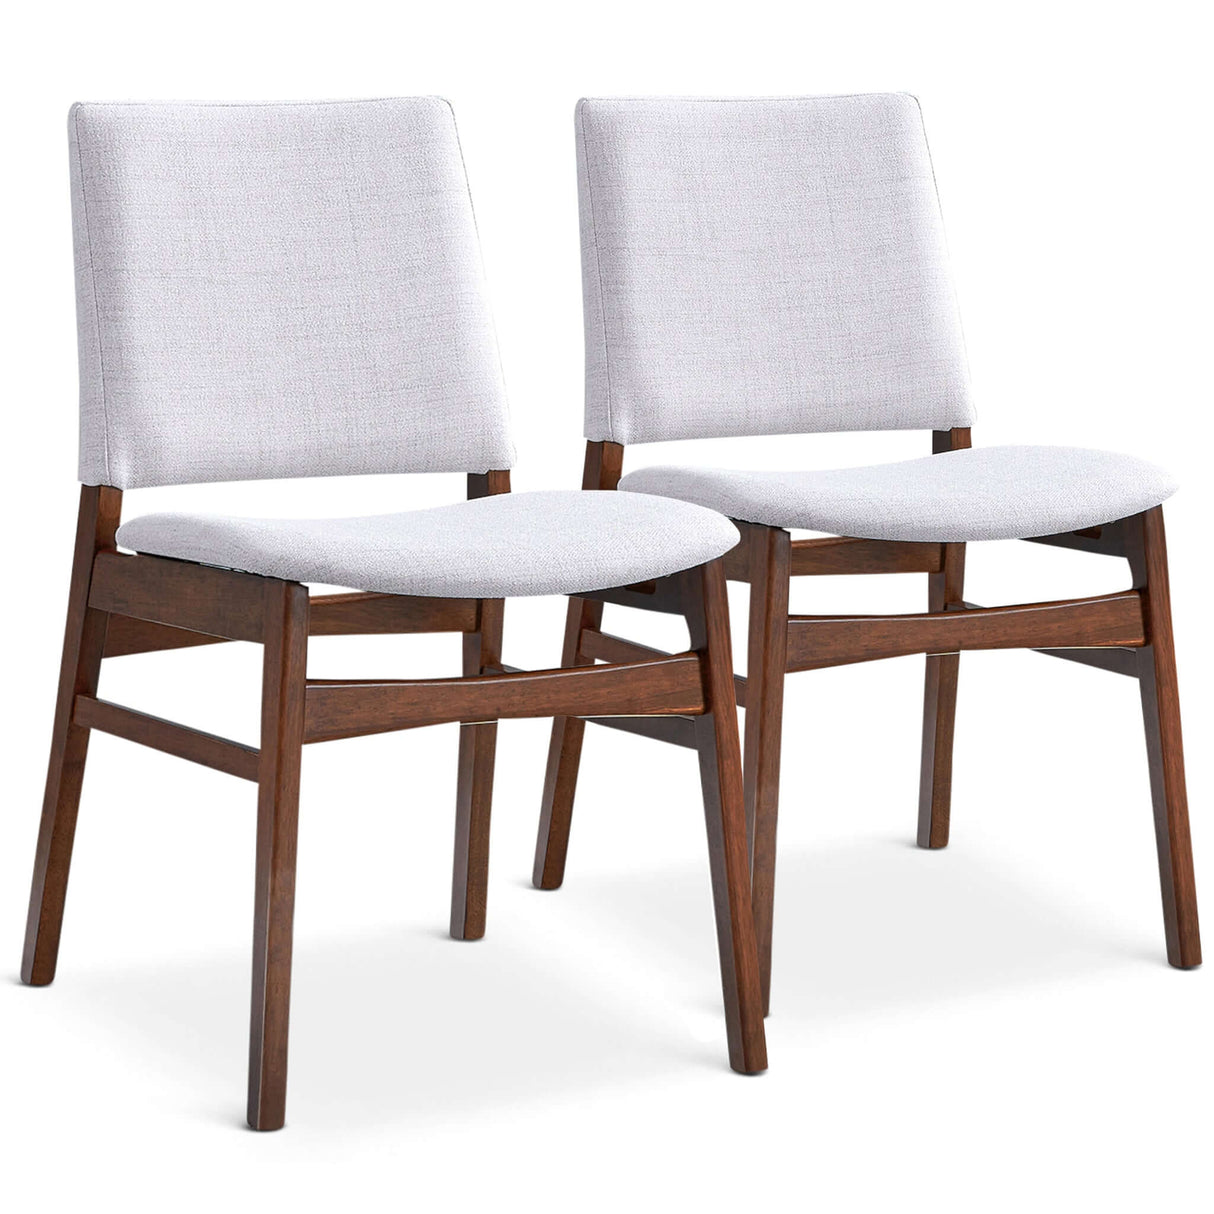 Gusto Mid-Century Modern Fabric Dining Chair (Set of 2)